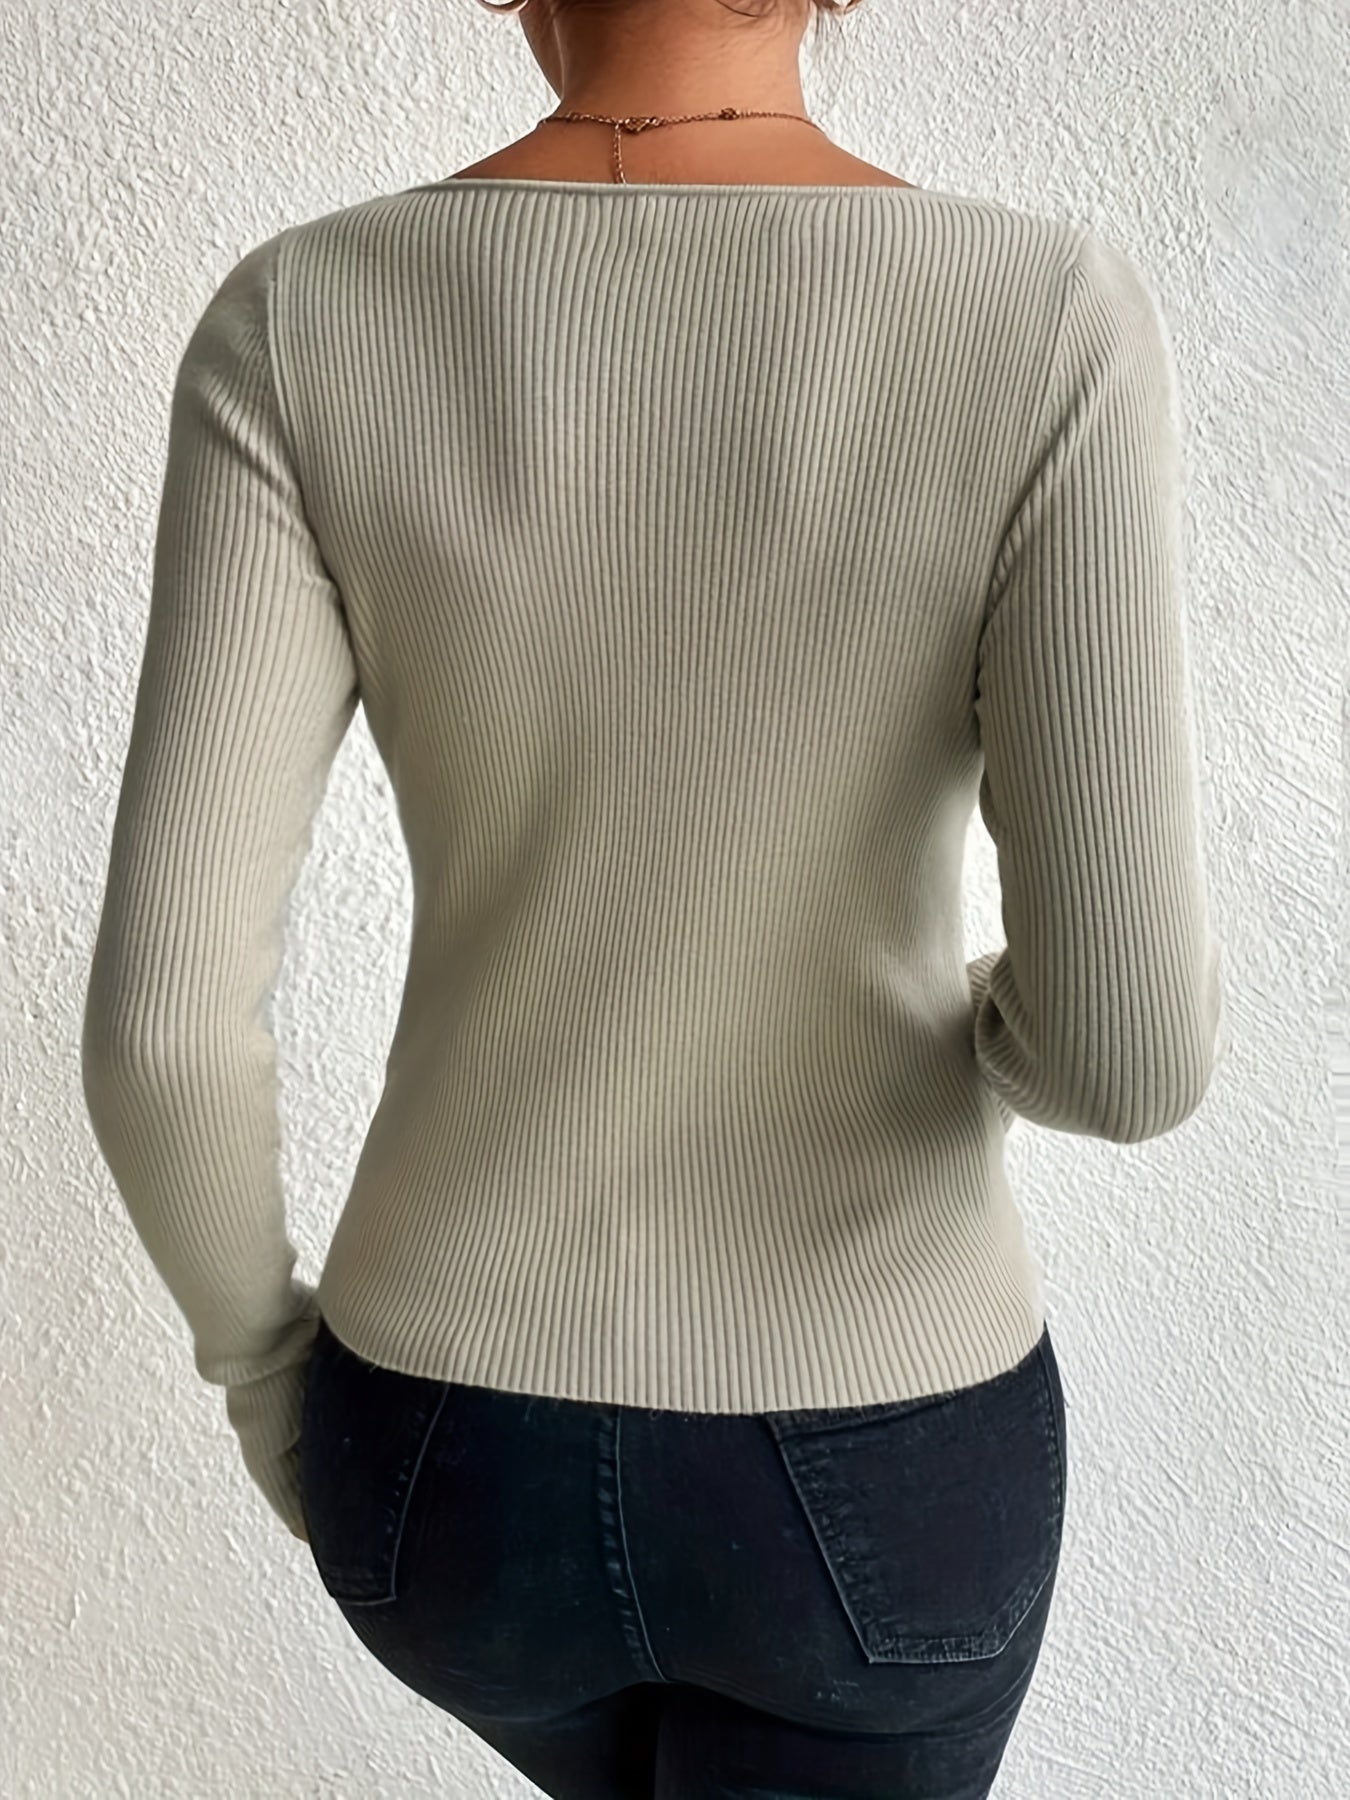 Antmvs Solid Sweetheart Neck Knitted Top, Elegant Long Sleeve Slim Sweater, Women's Clothing